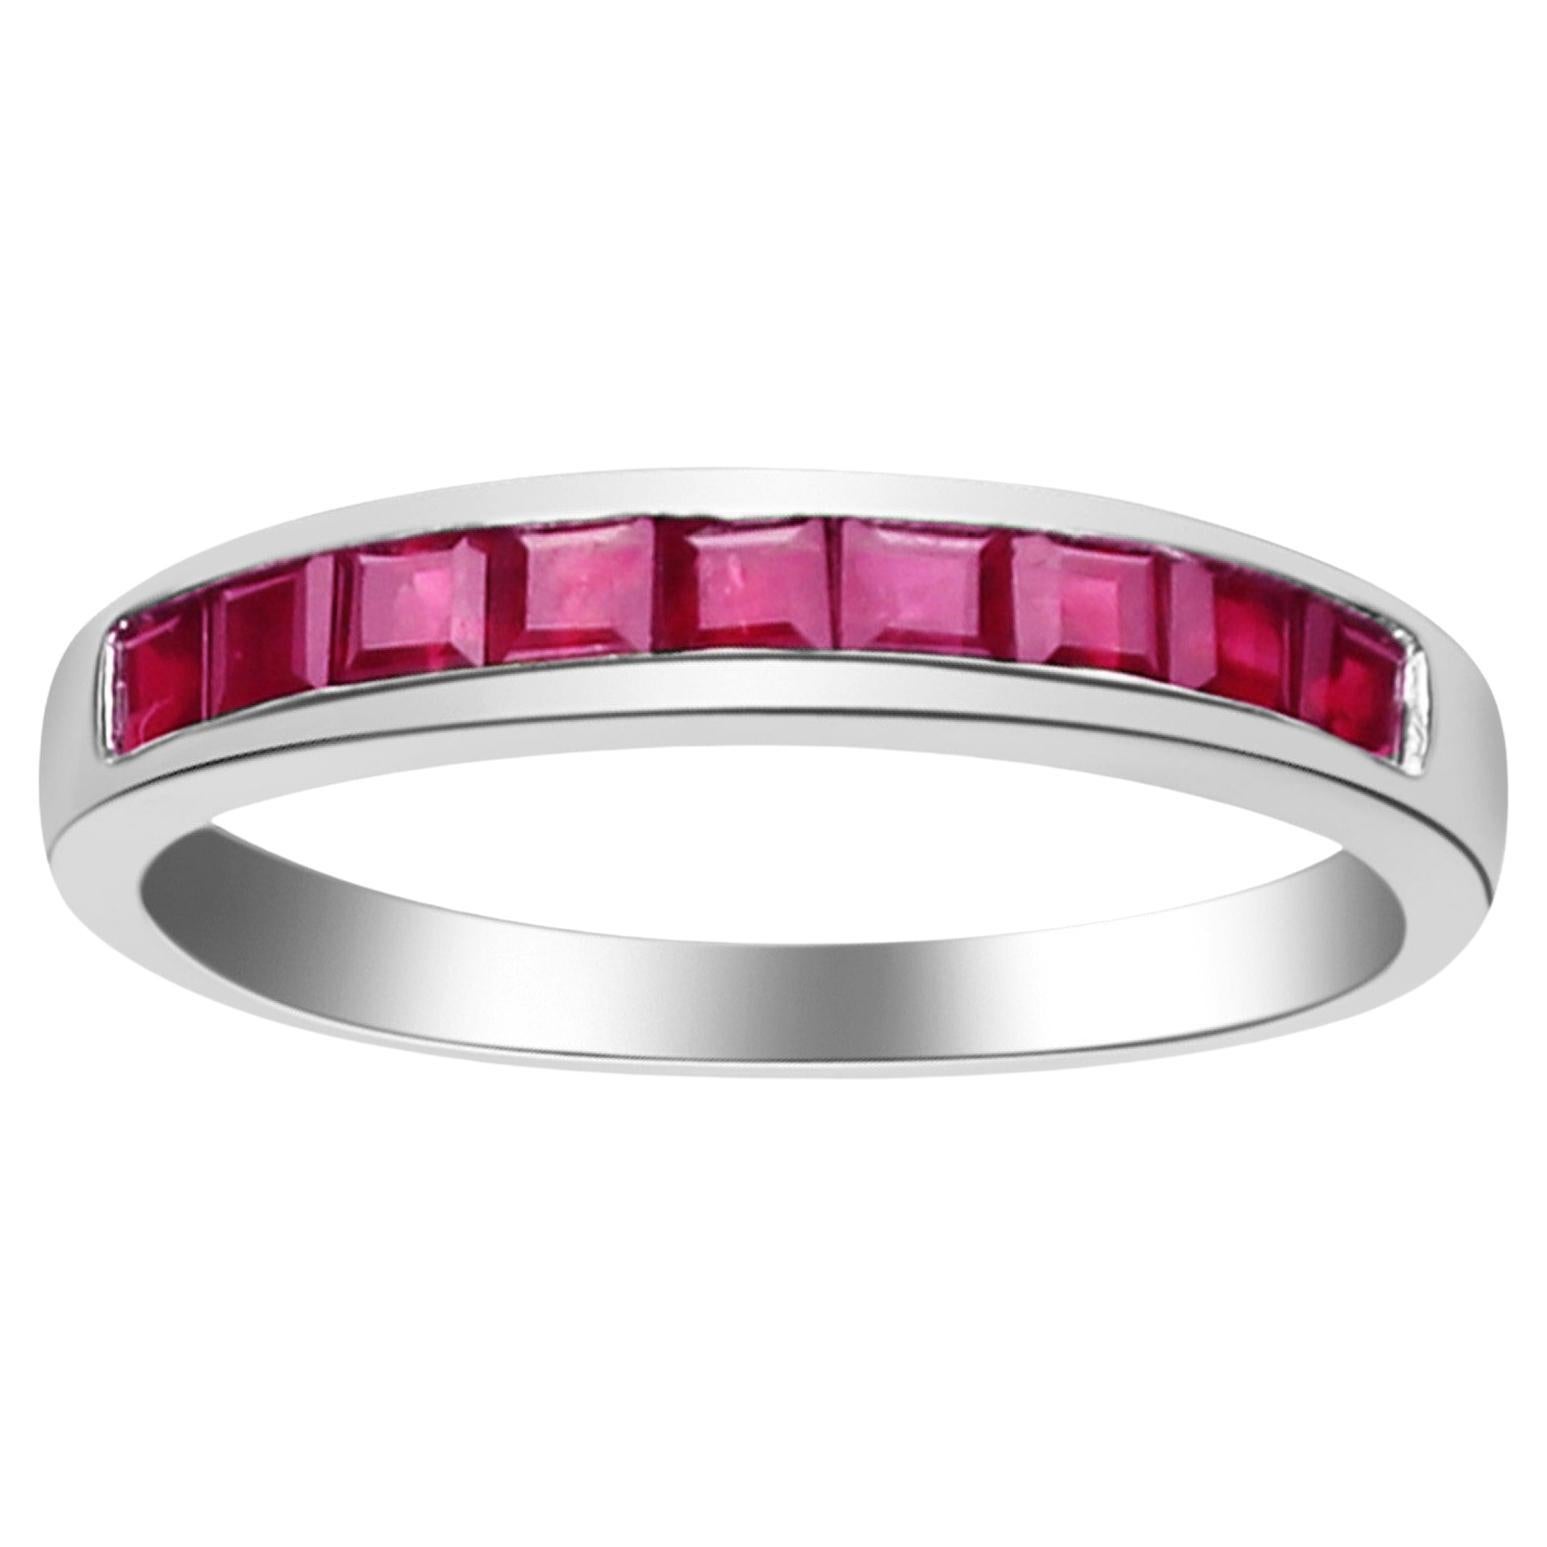 1.11 Carat Square Cut Ruby 14K White Gold Wedding Ring For Sale